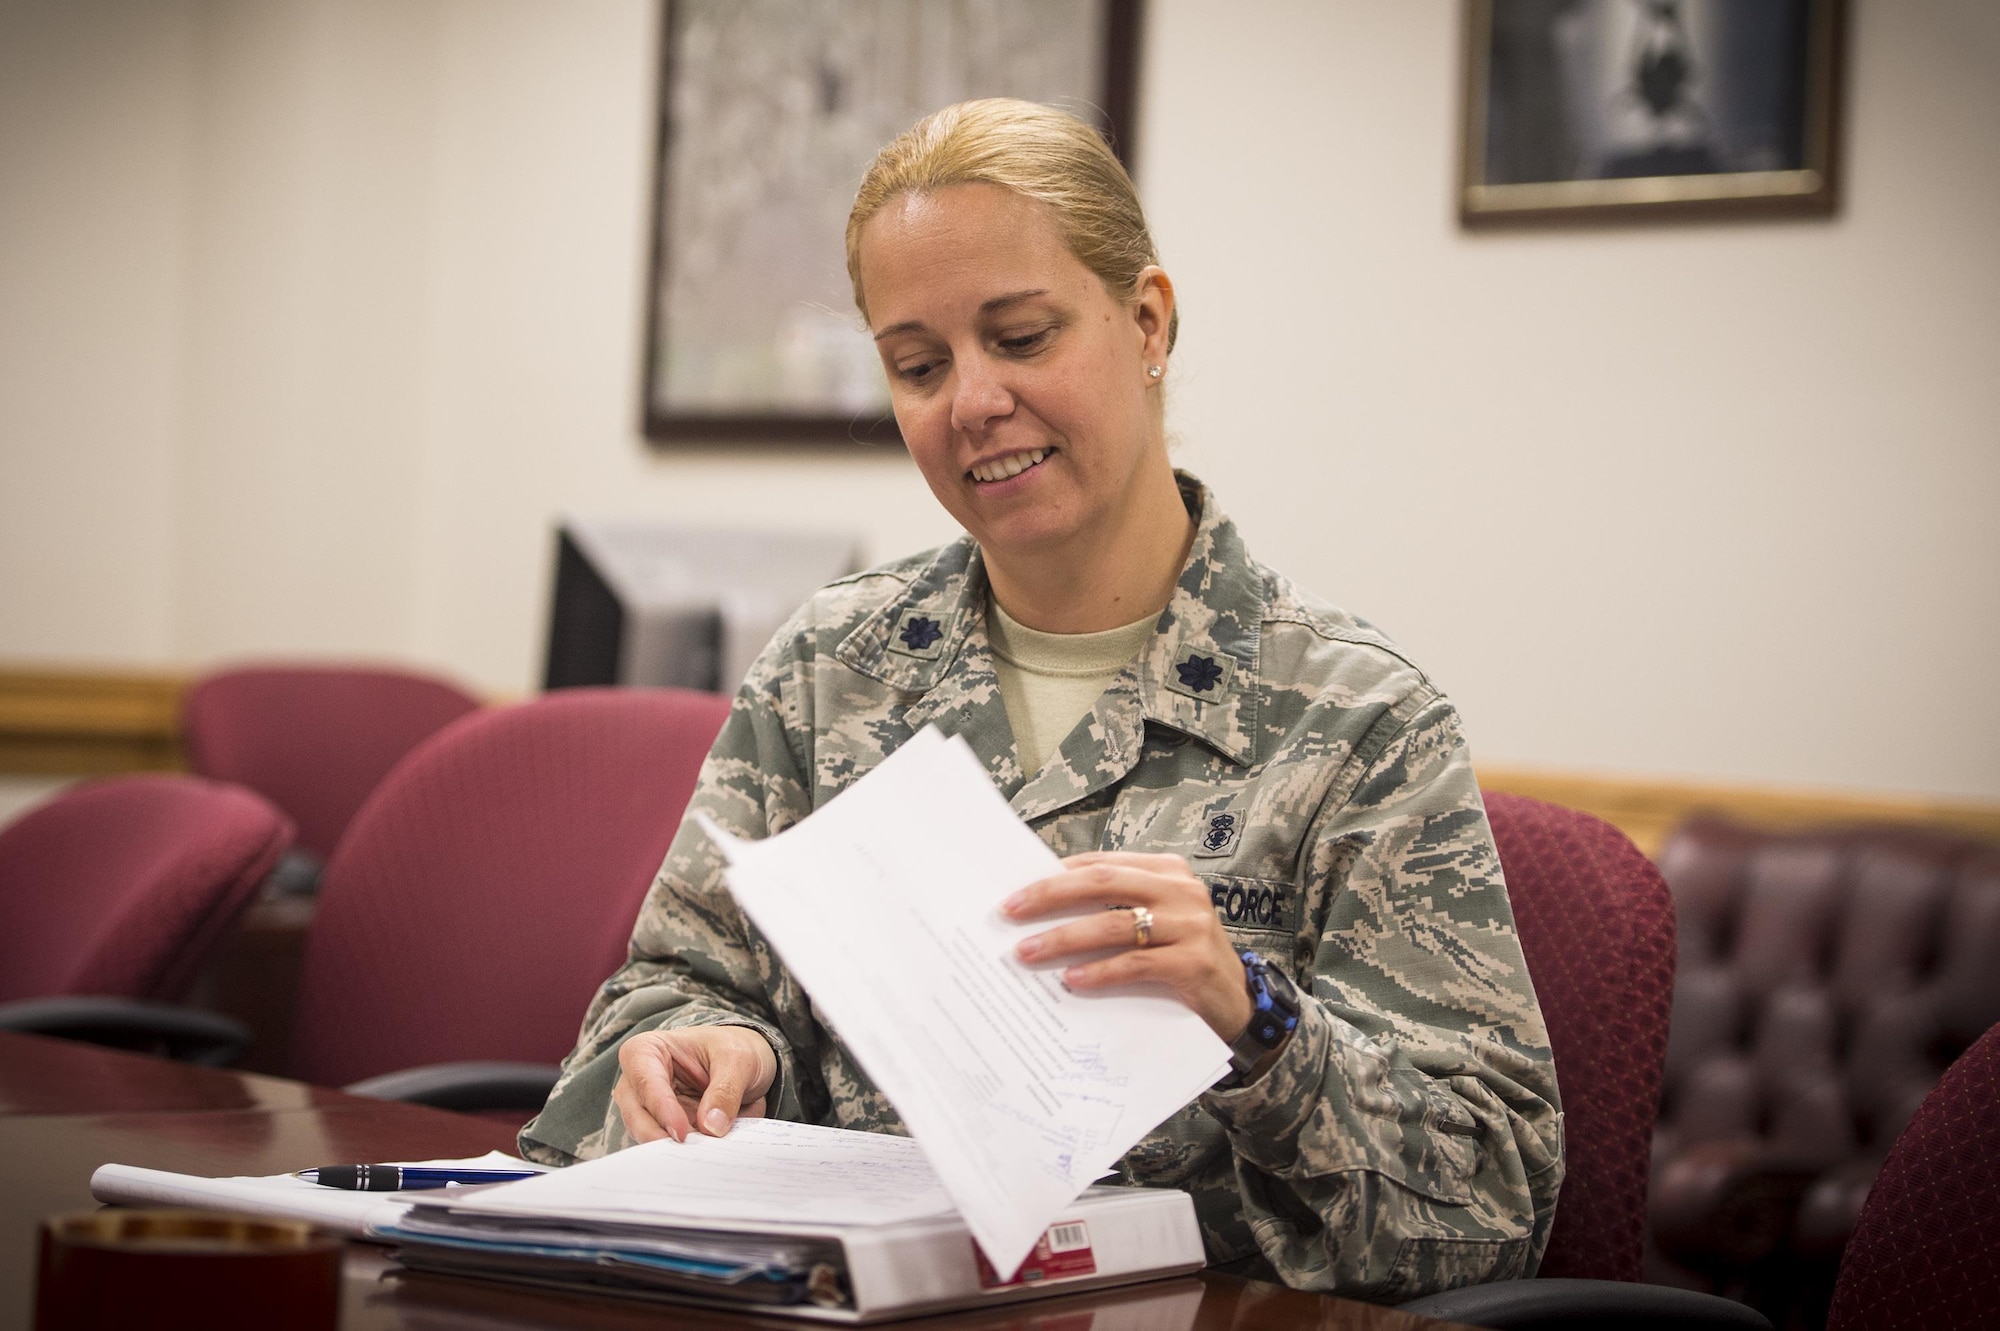 Lt. Col. Heather Perez, 23d Medical Operation Support Squadron commander and chief of nursing, smiles during a meeting, May 2, 2017, at Moody Air Force Base, Ga. As Moody's chief nurse, Perez is in charge of approximately 300 nurses and medical technicians. She uses her vast nursing experiences to improve medical processes, ensure patient safety, and manage education and training. (U.S. Air Force photo by Senior Airman Ceaira Young)